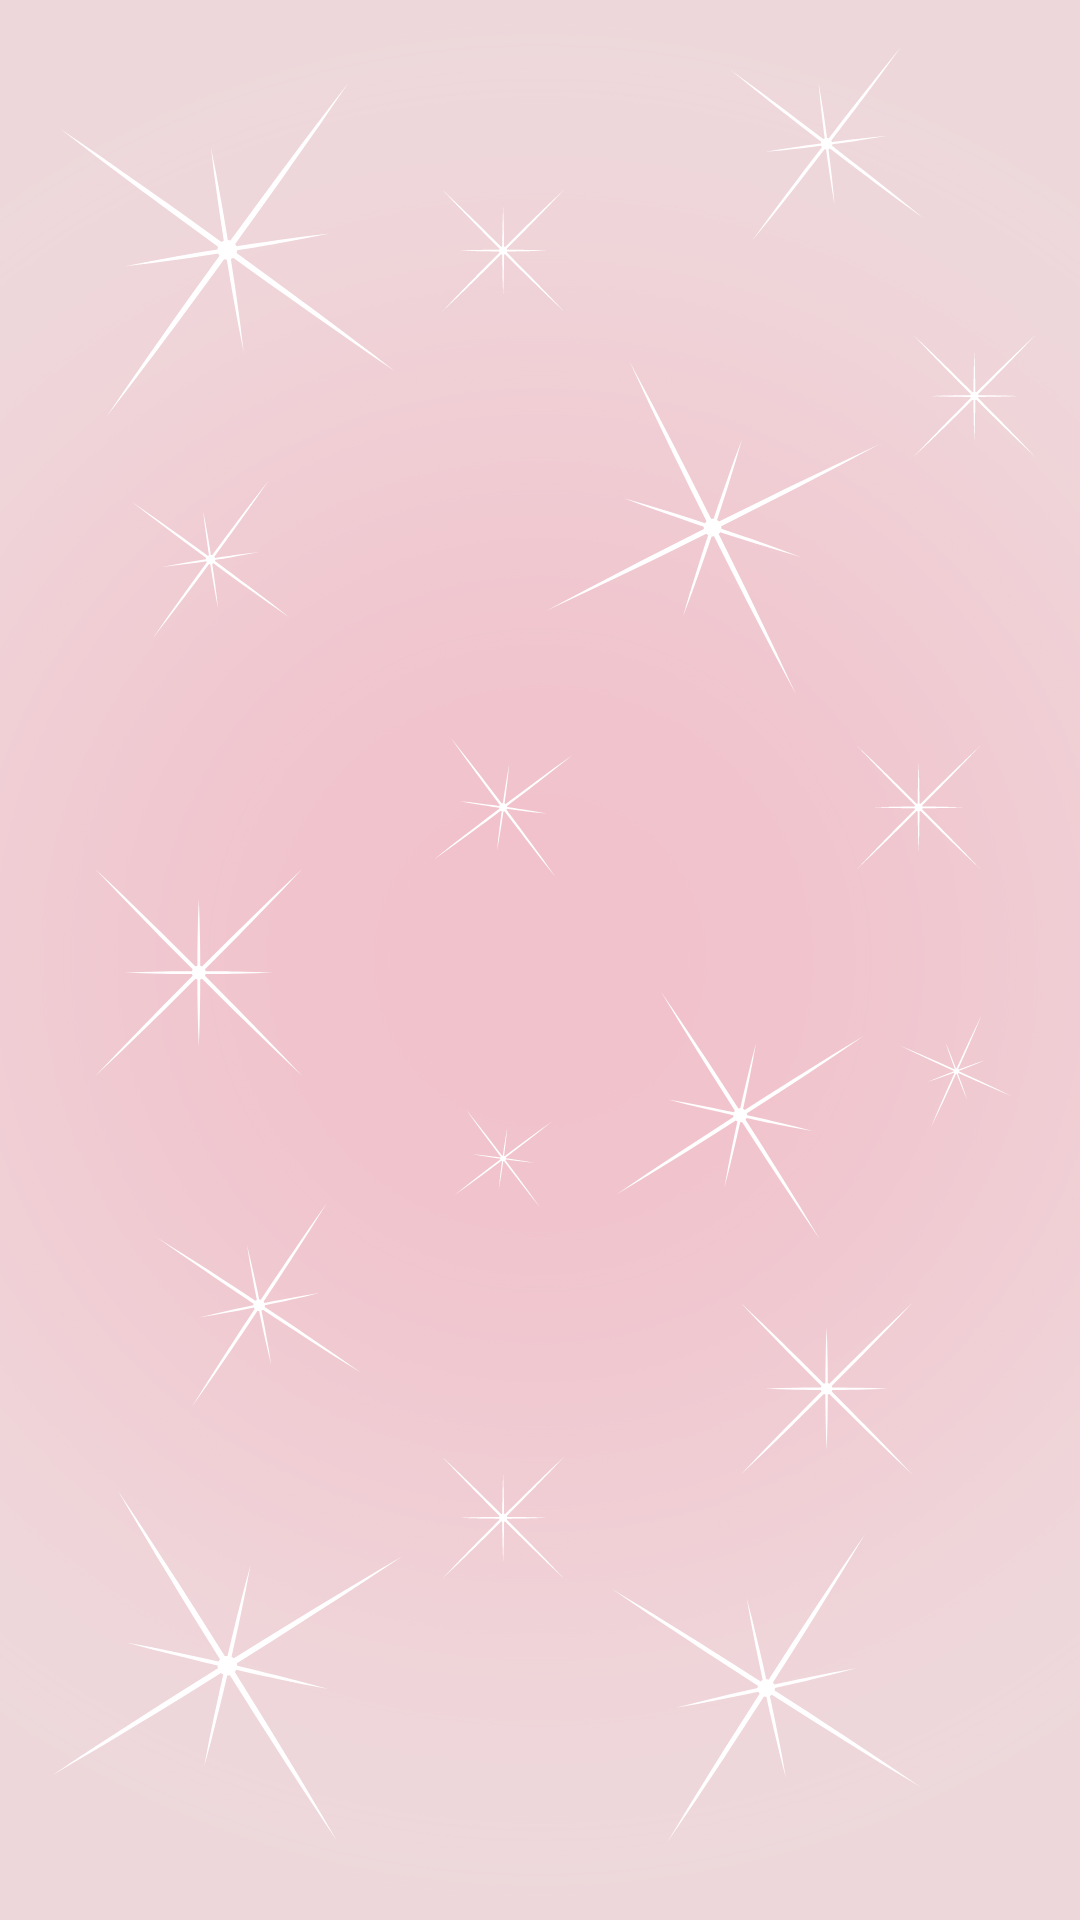 Free Light Pink Phone Wallpaper Background Clever Heart